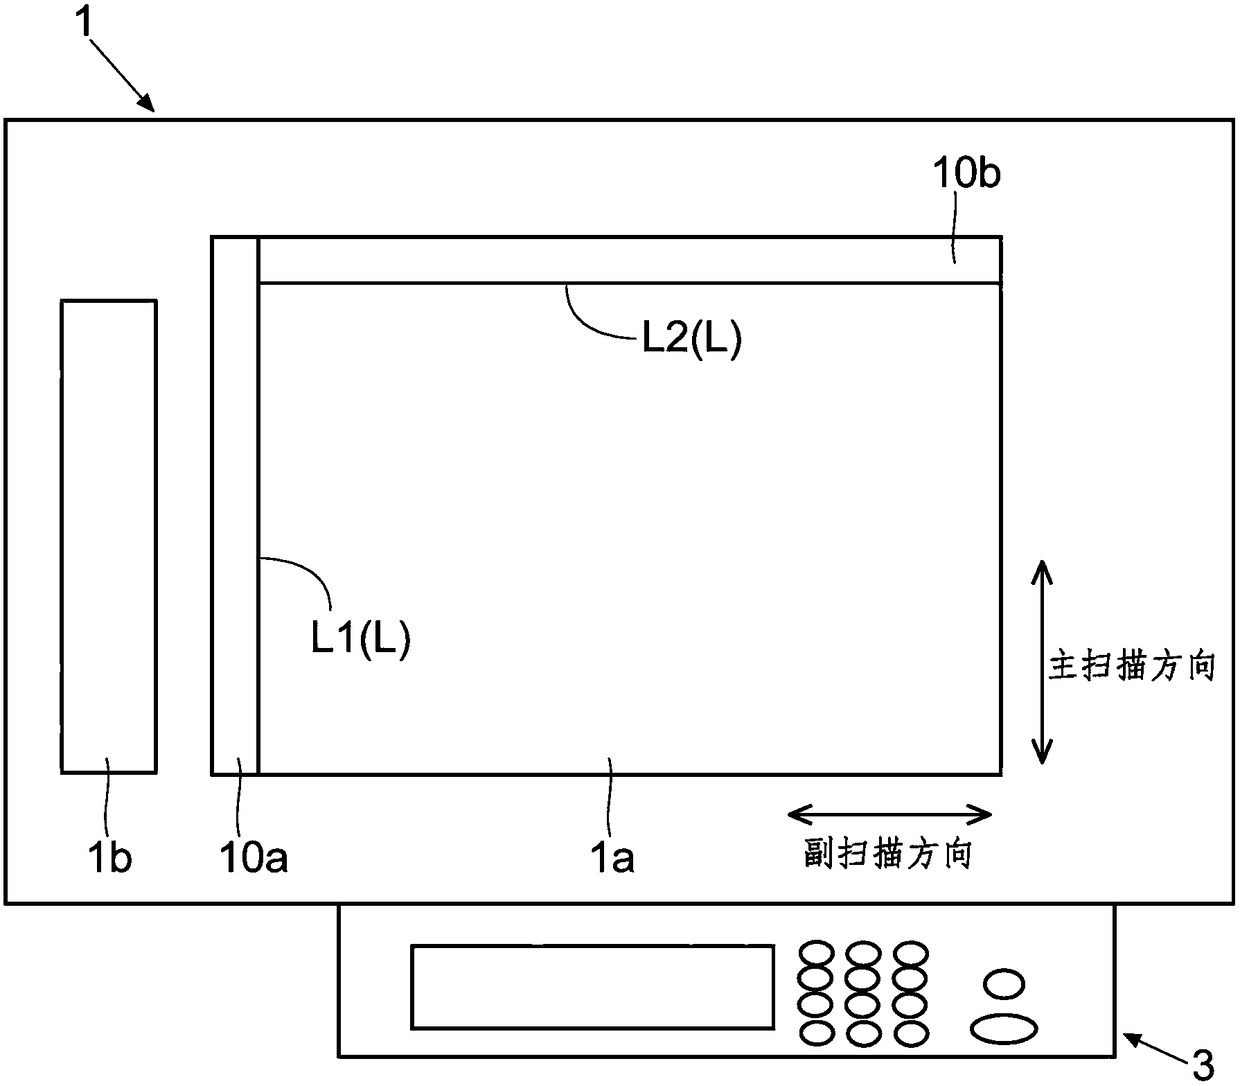 Image reading device and image forming device